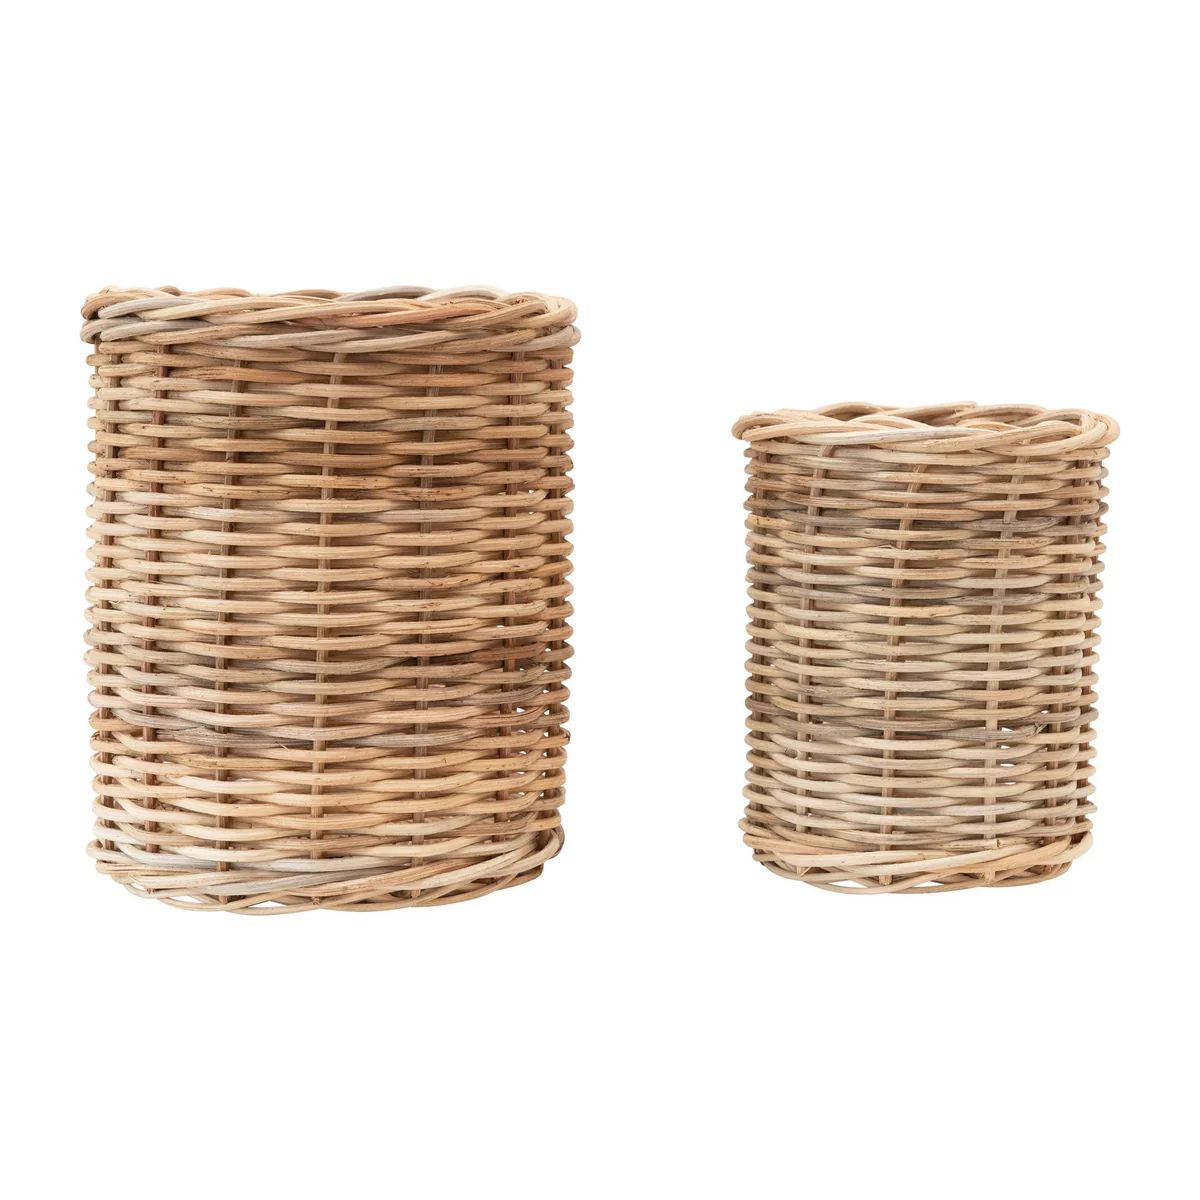 Handwoven Baskets- Set of 2 | APIARY by The Busy Bee